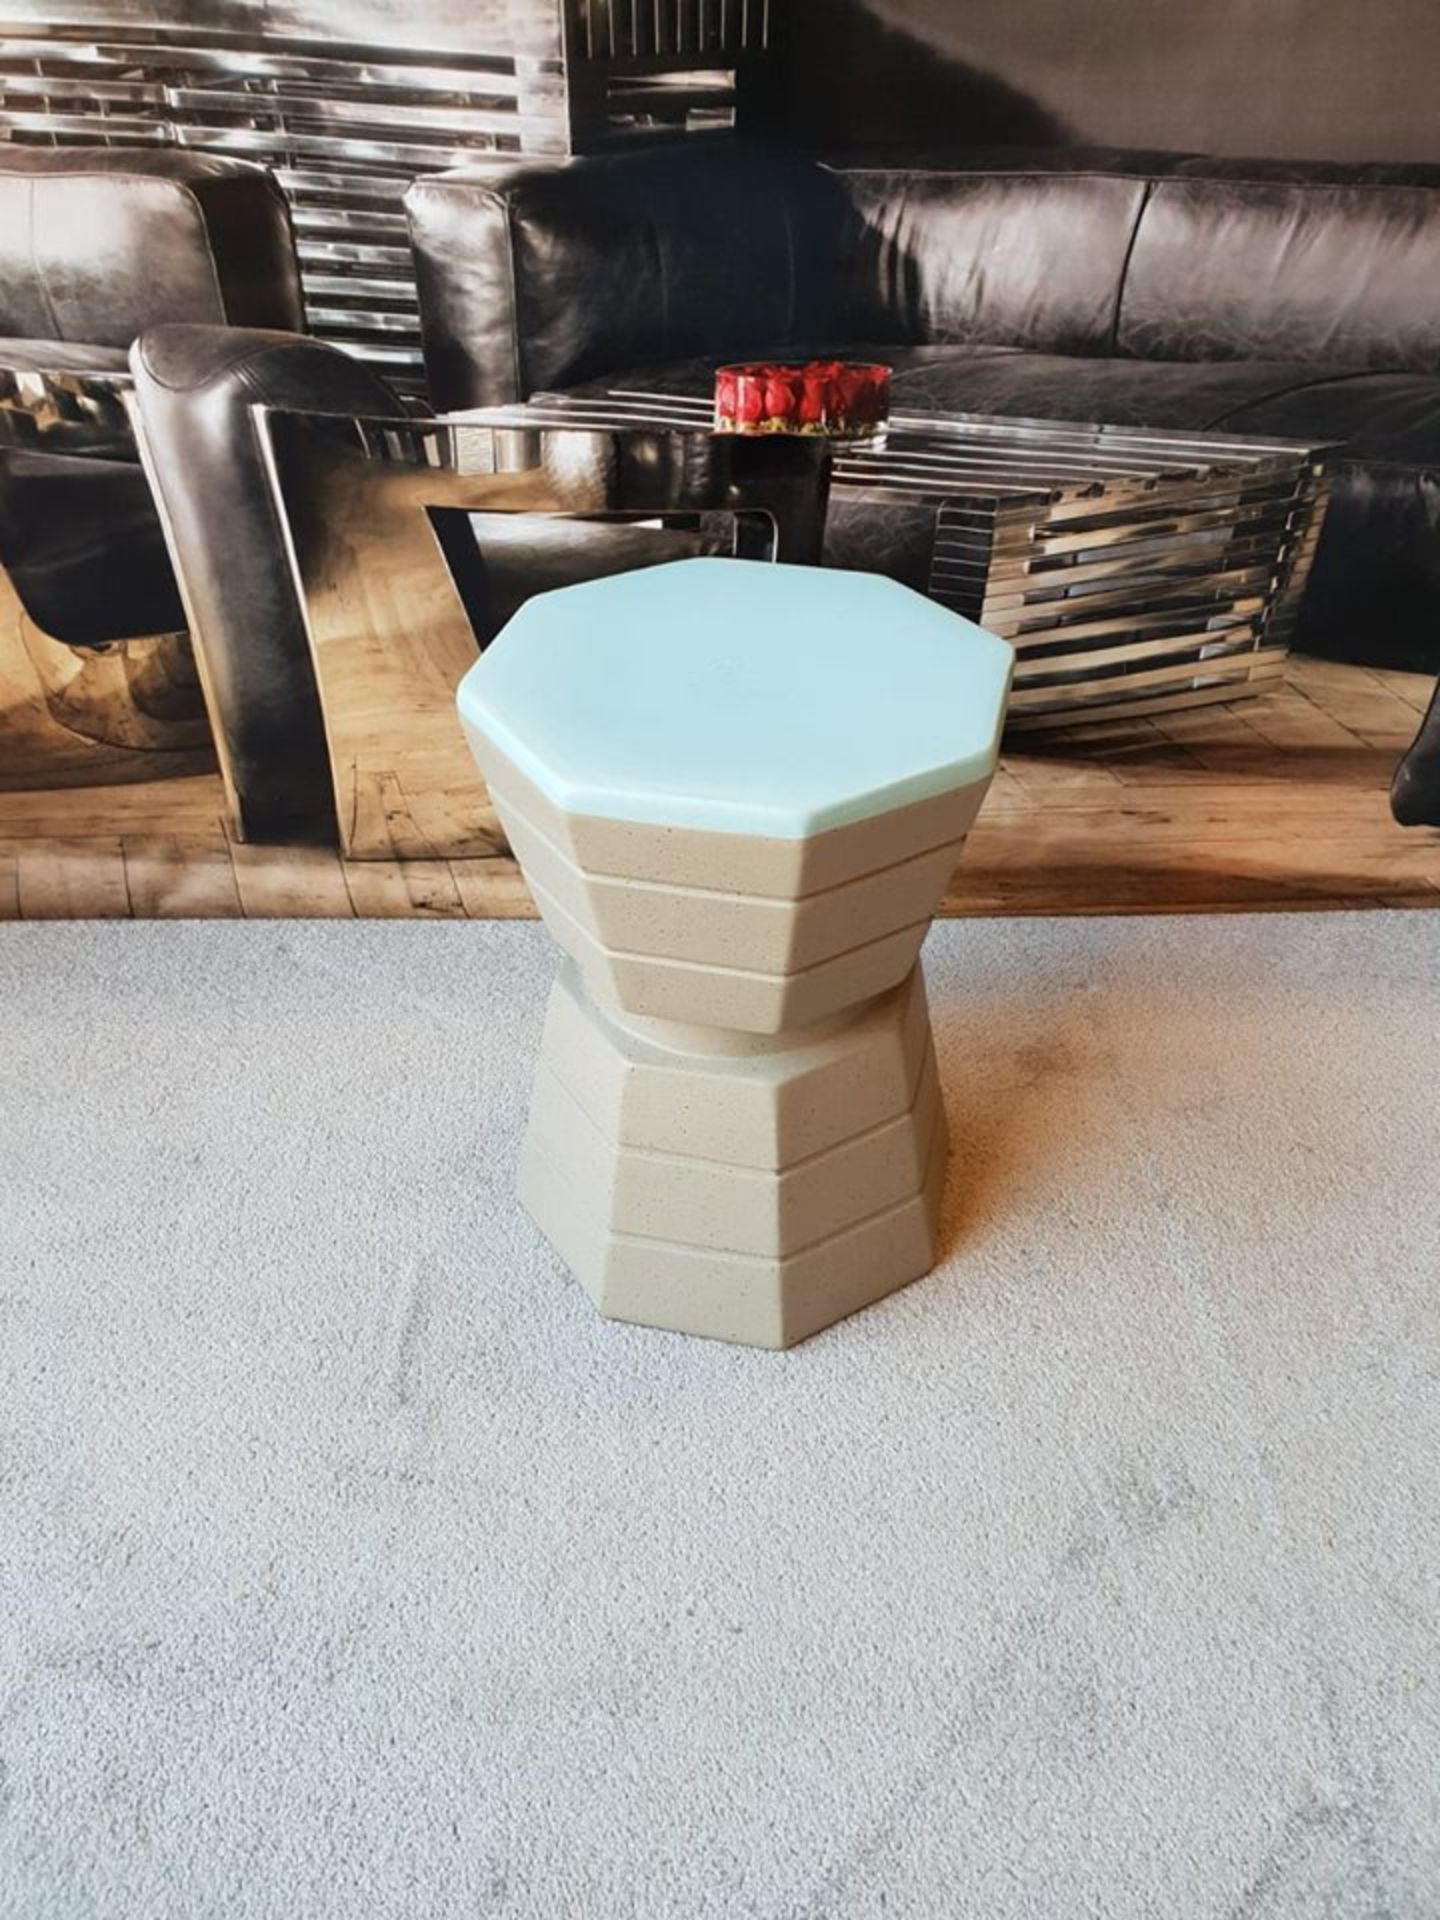 Tracey Boyd Concrete Barrista Stool Blue Top 40 x 56cm MSRP £174 - Image 2 of 2